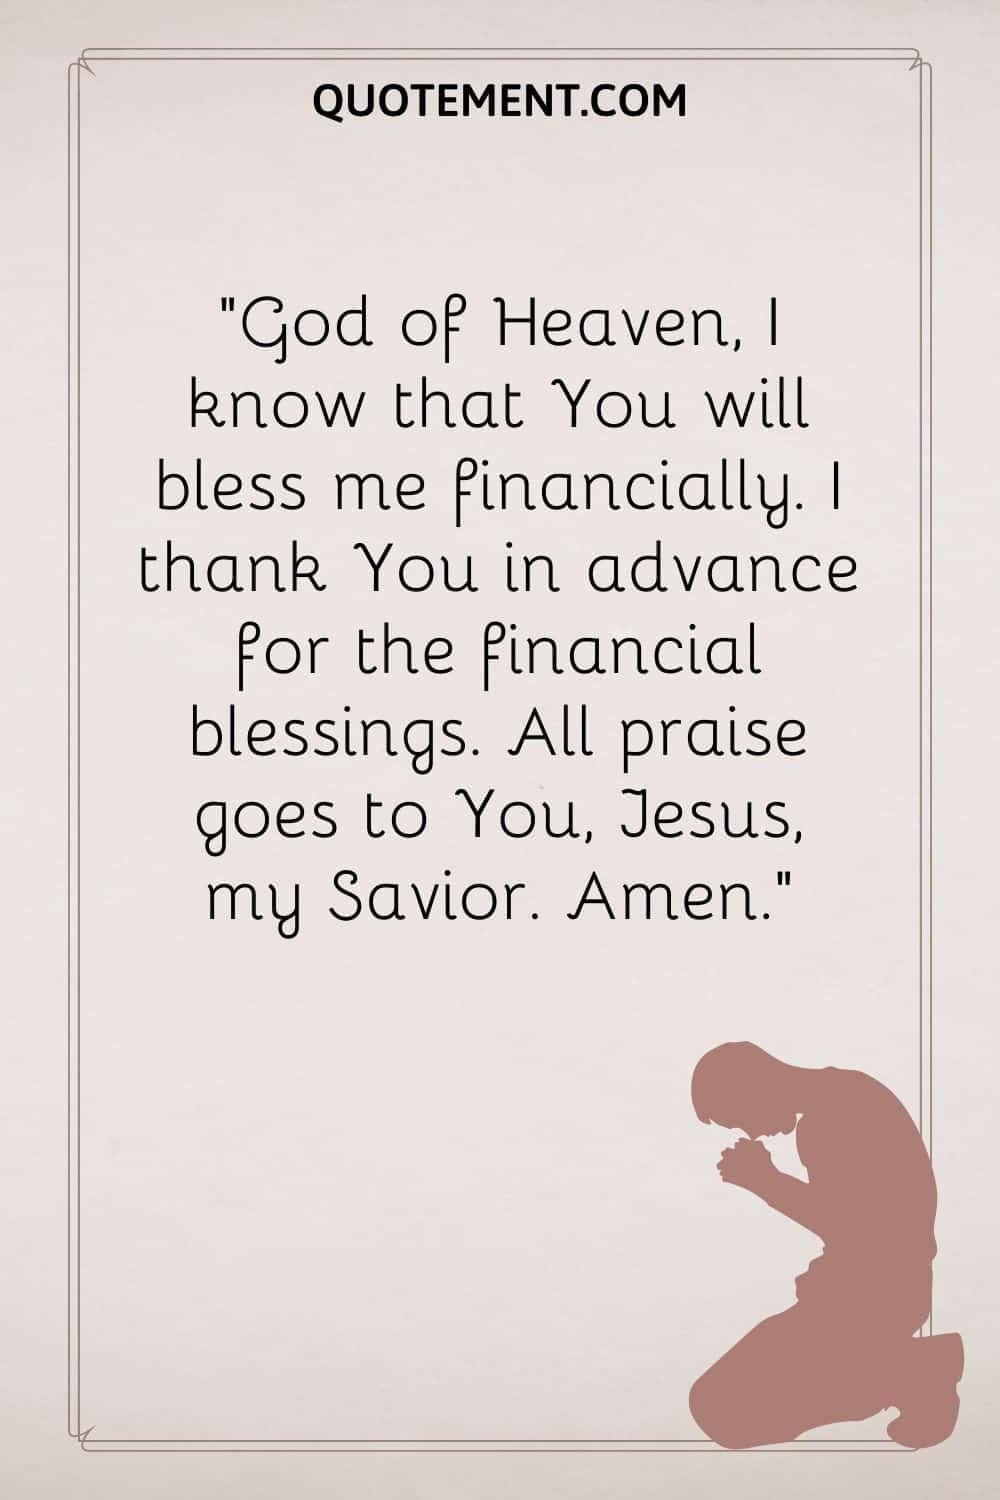 God of Heaven, I know that You will bless me financially